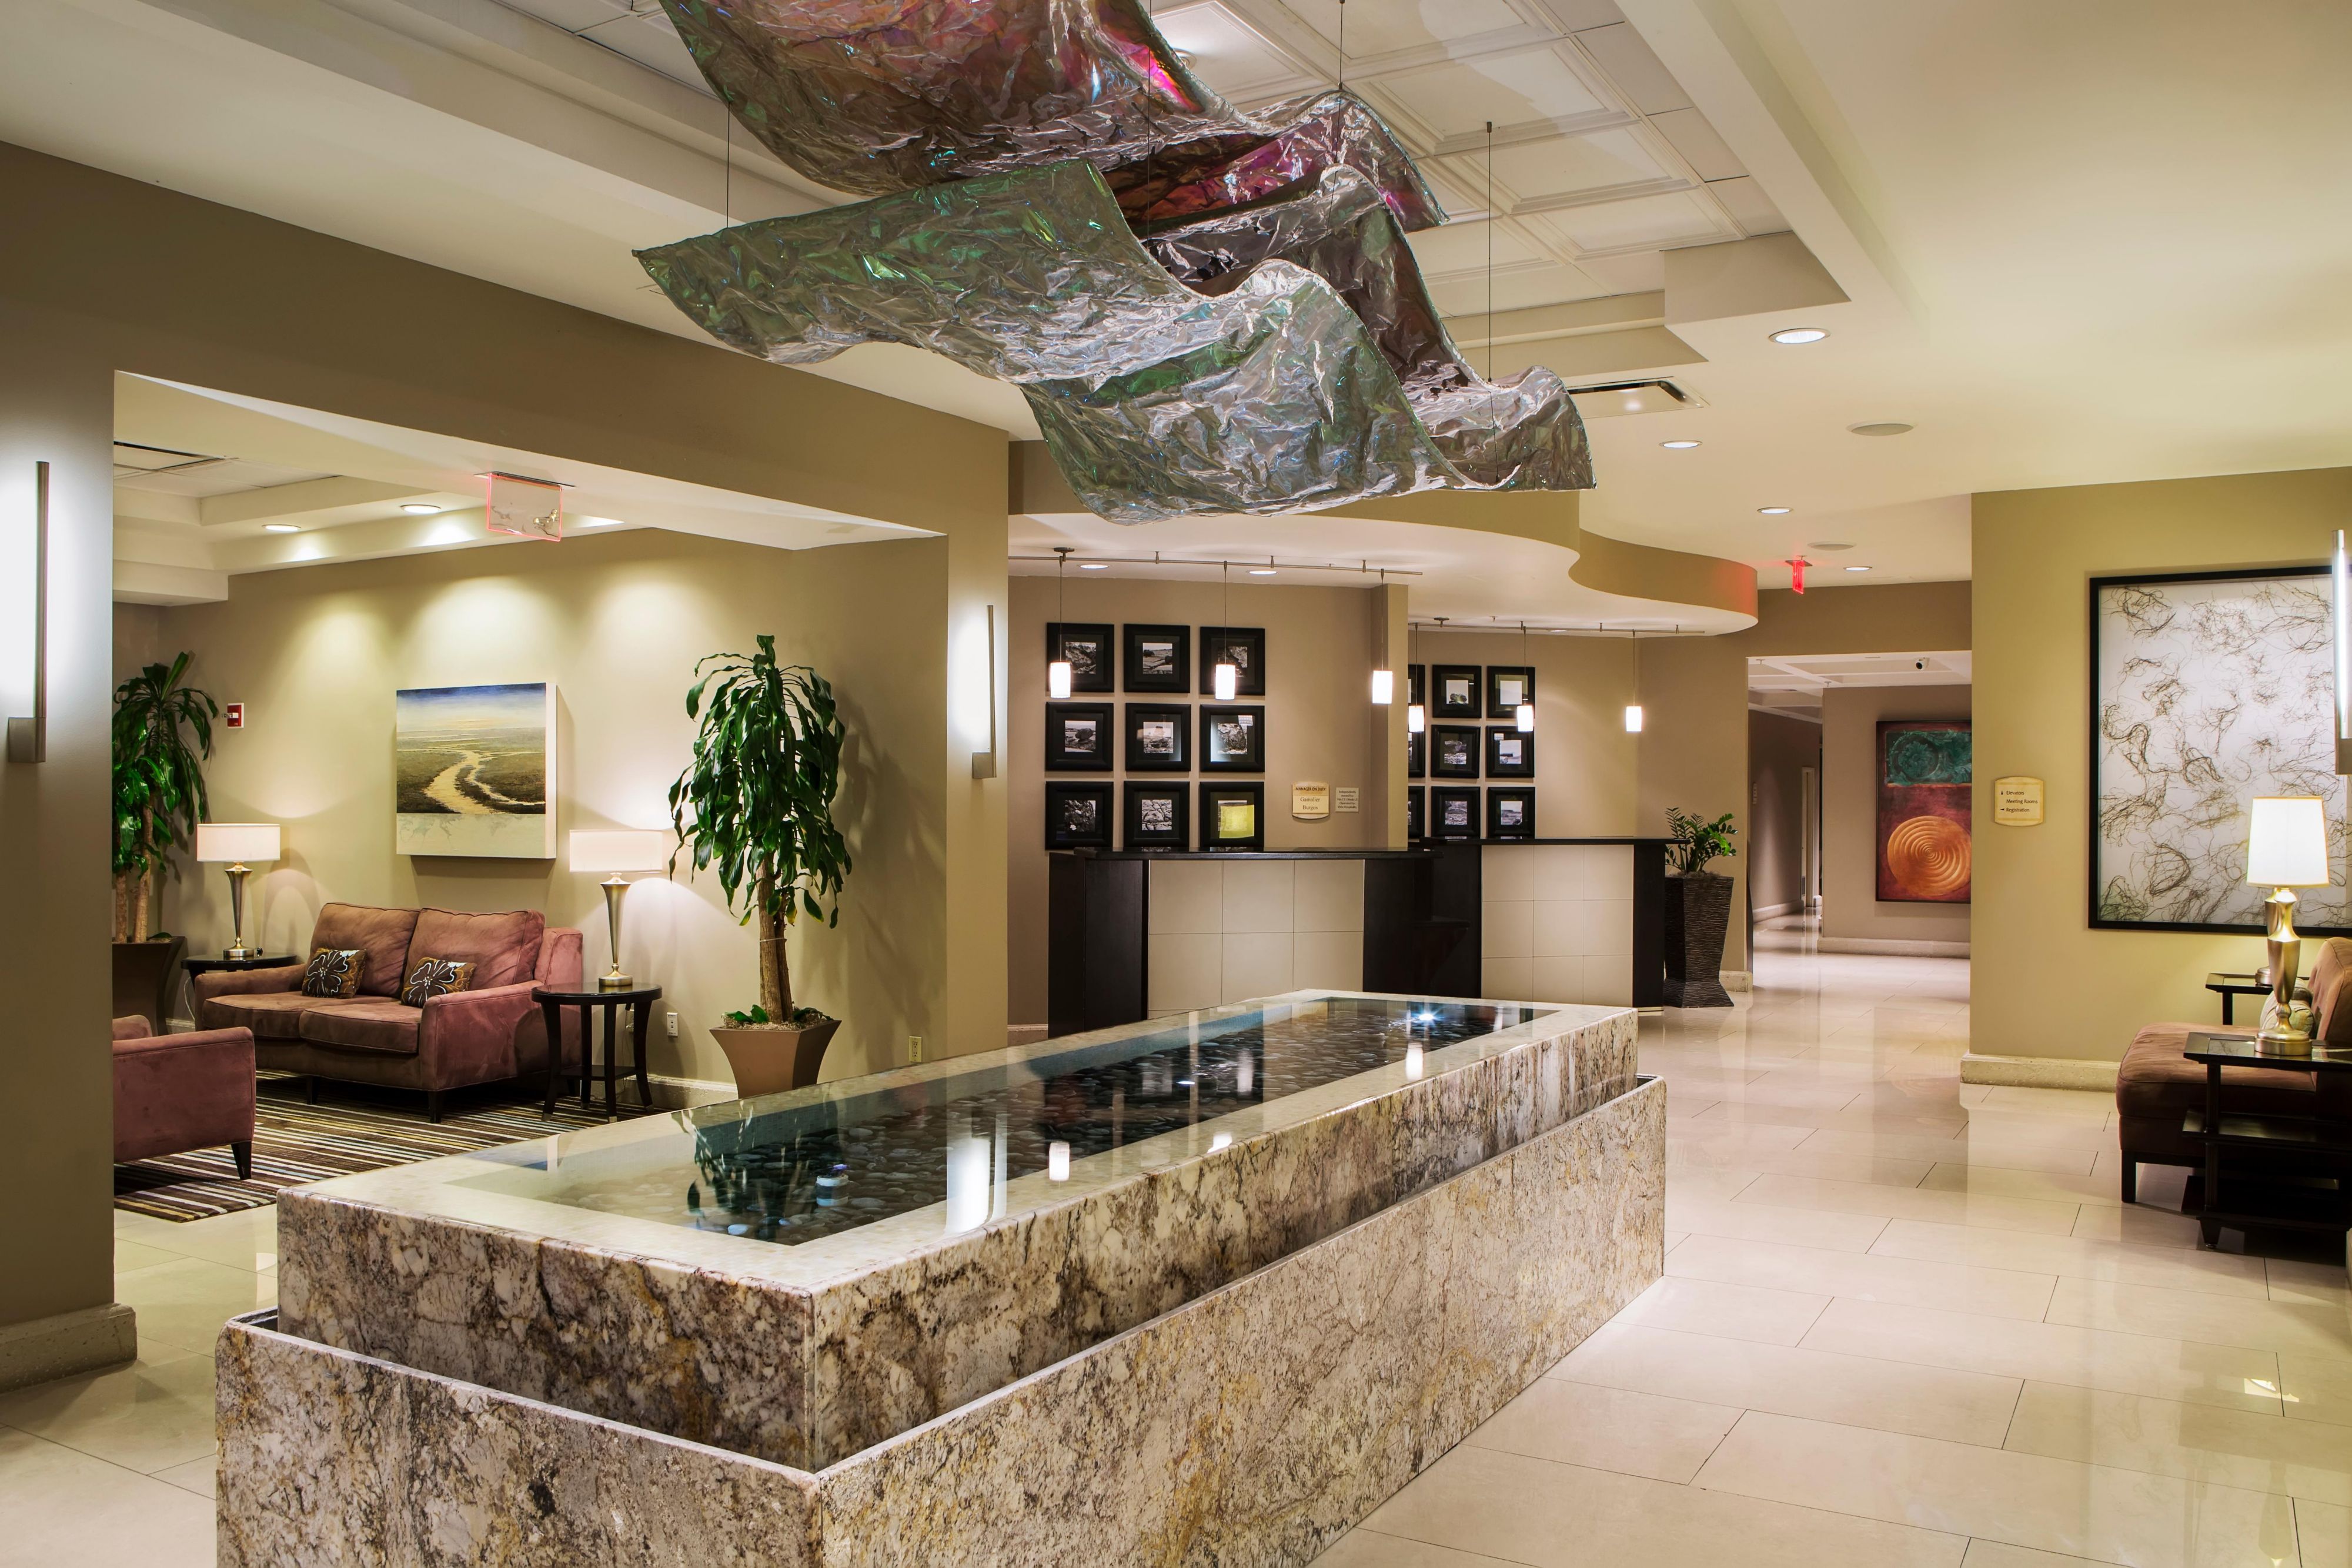 Enjoy and relax in the Crowne Plaza Orlando Dowtown hotel lobby